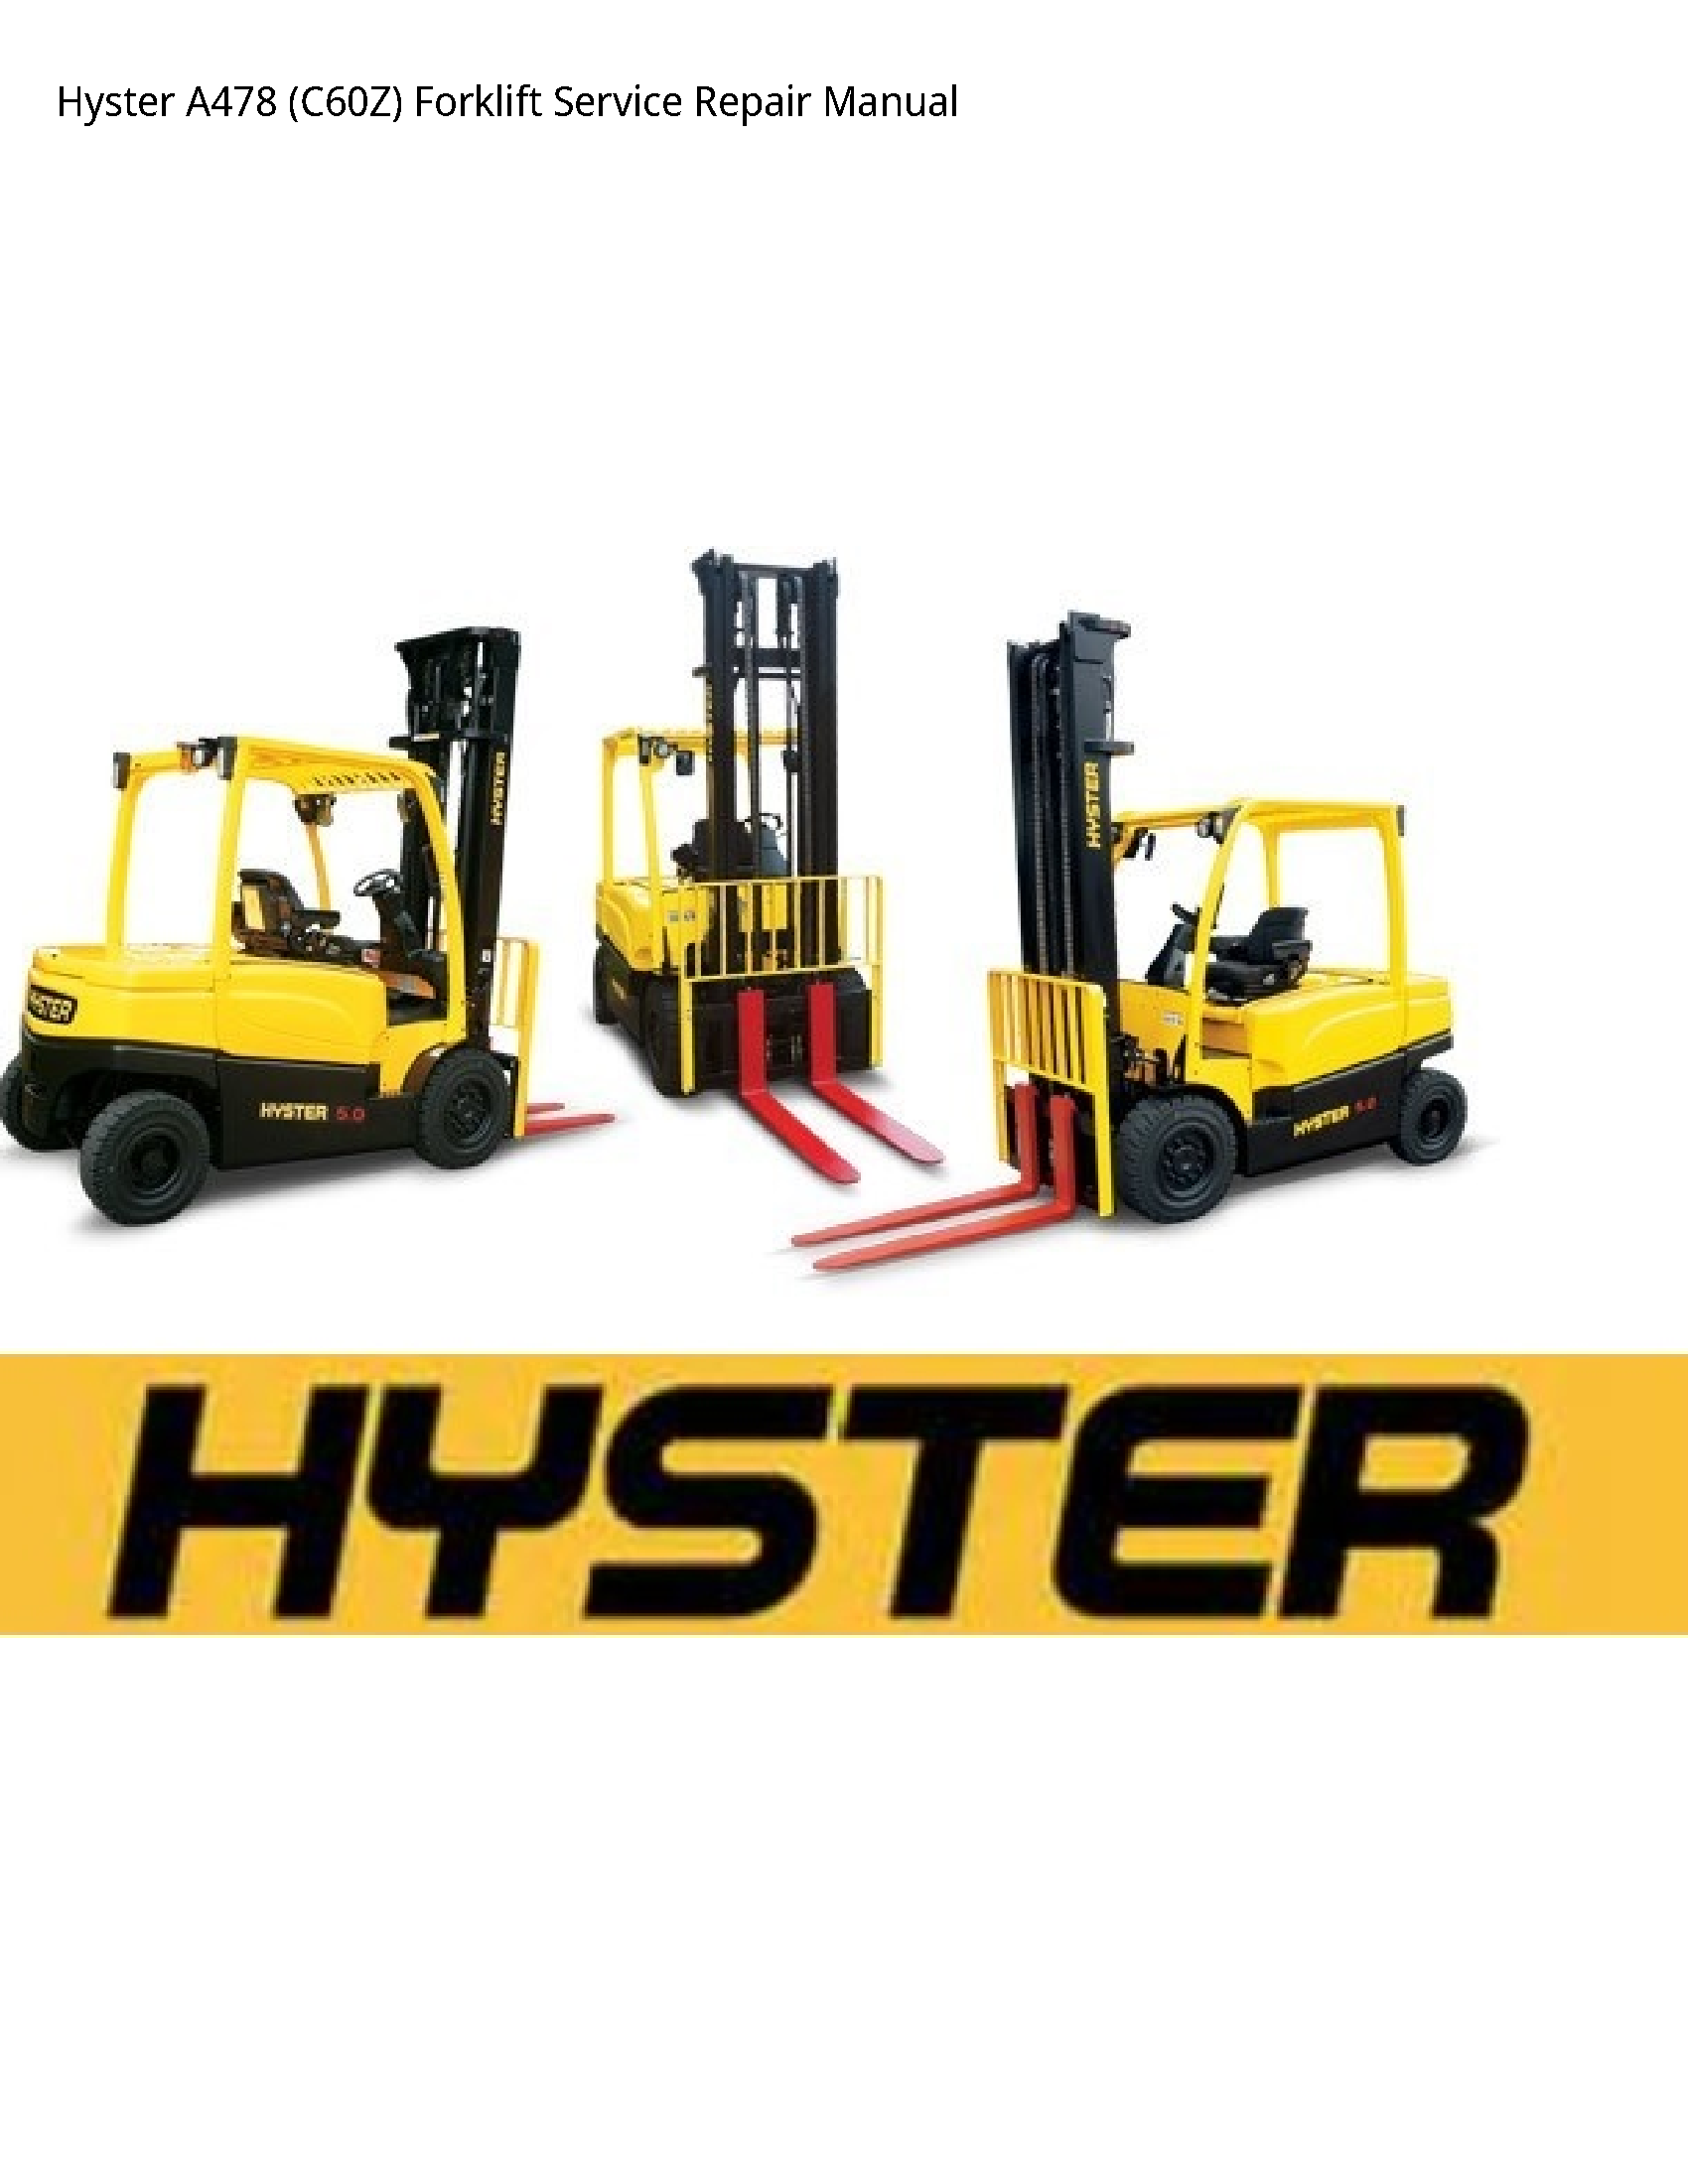 Hyster A478 Forklift manual